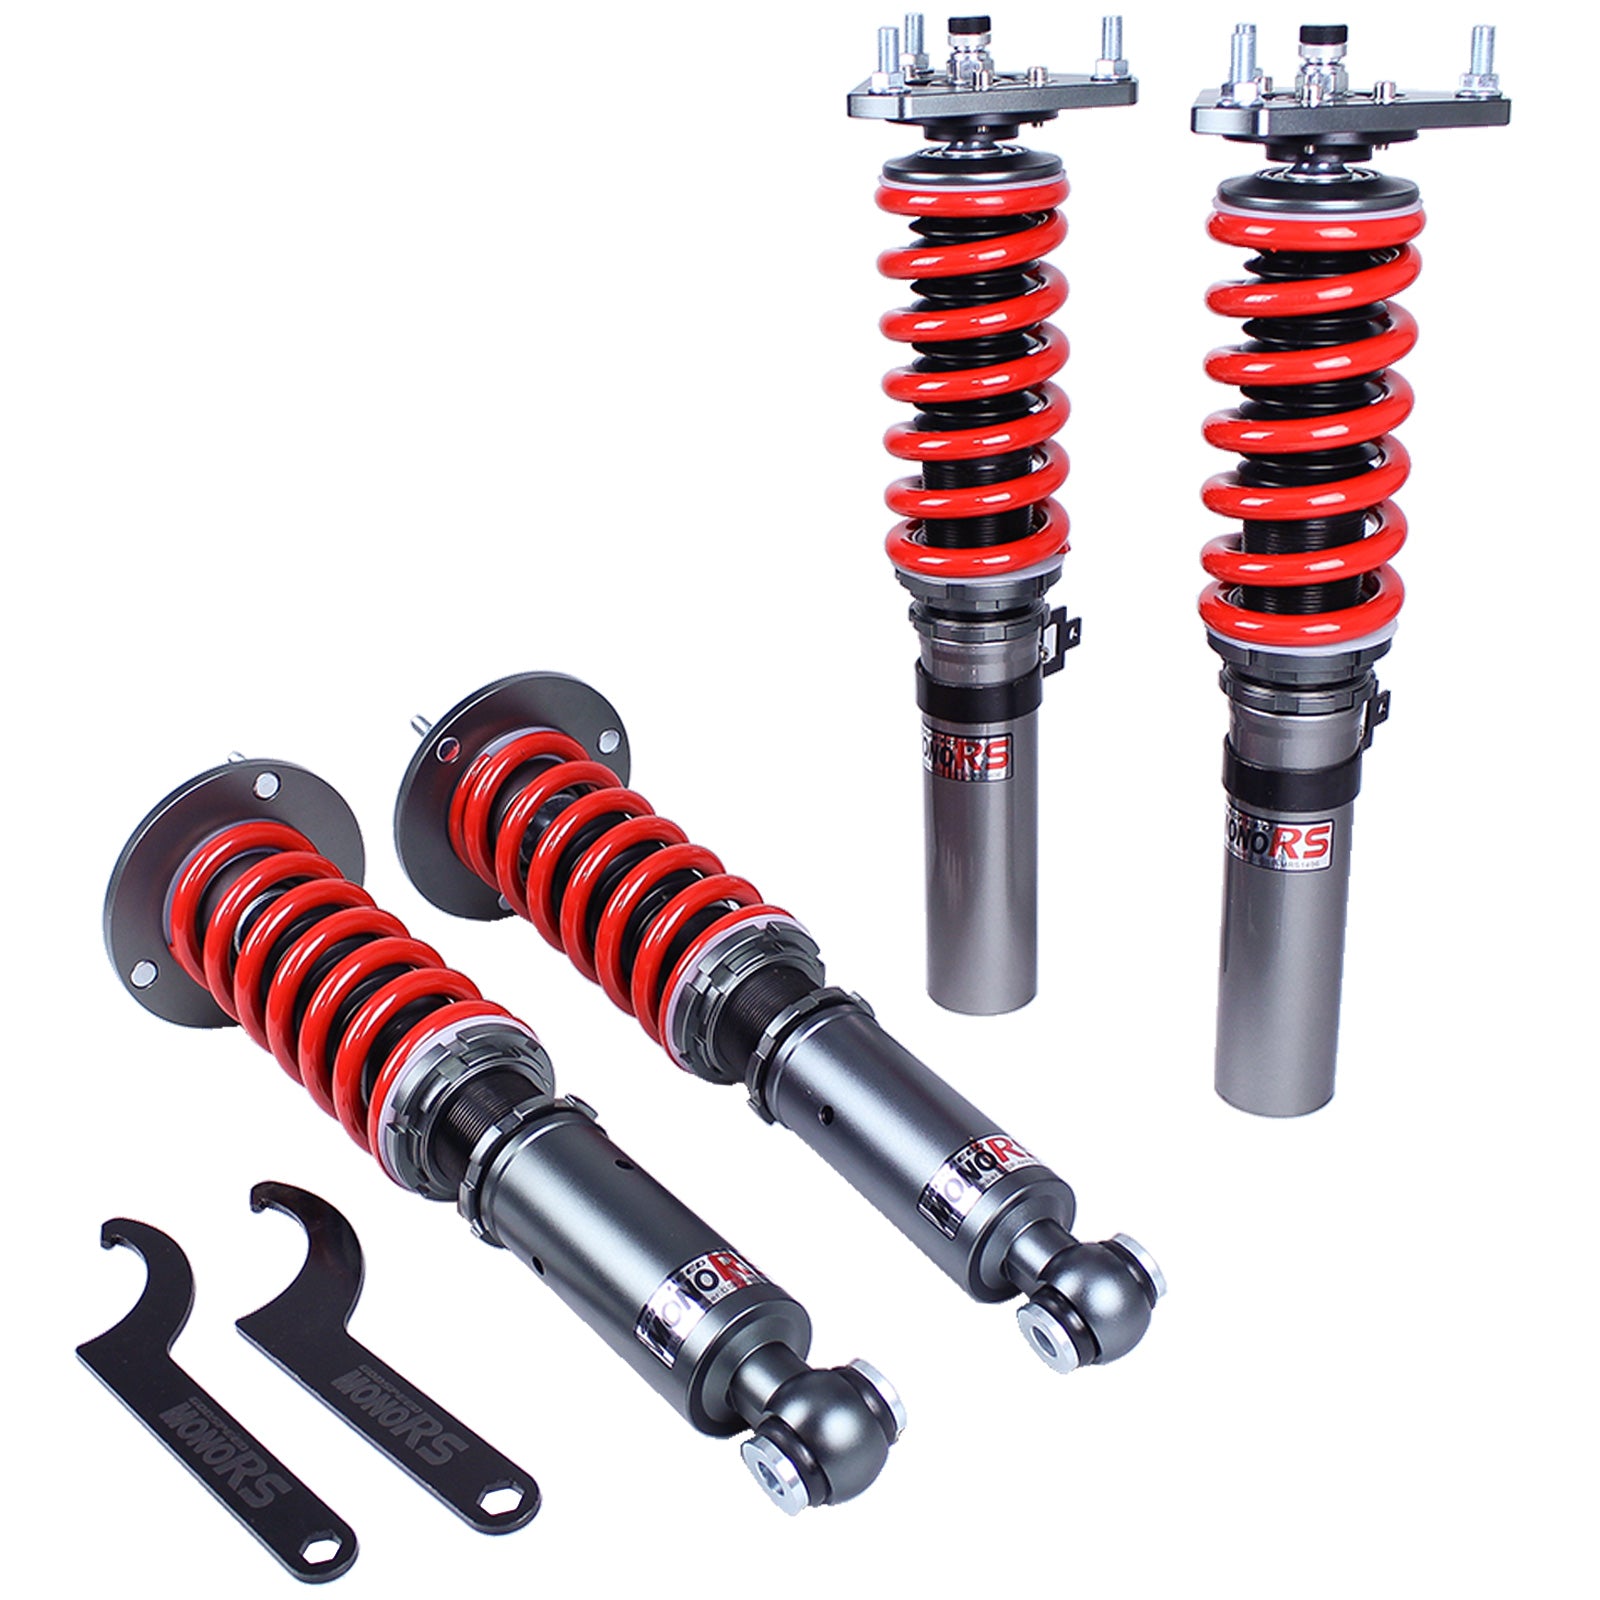 Godspeed MRS1406-A MonoRS Coilover Lowering Kit, 32 Damping Adjustment, Ride Height Adjustable